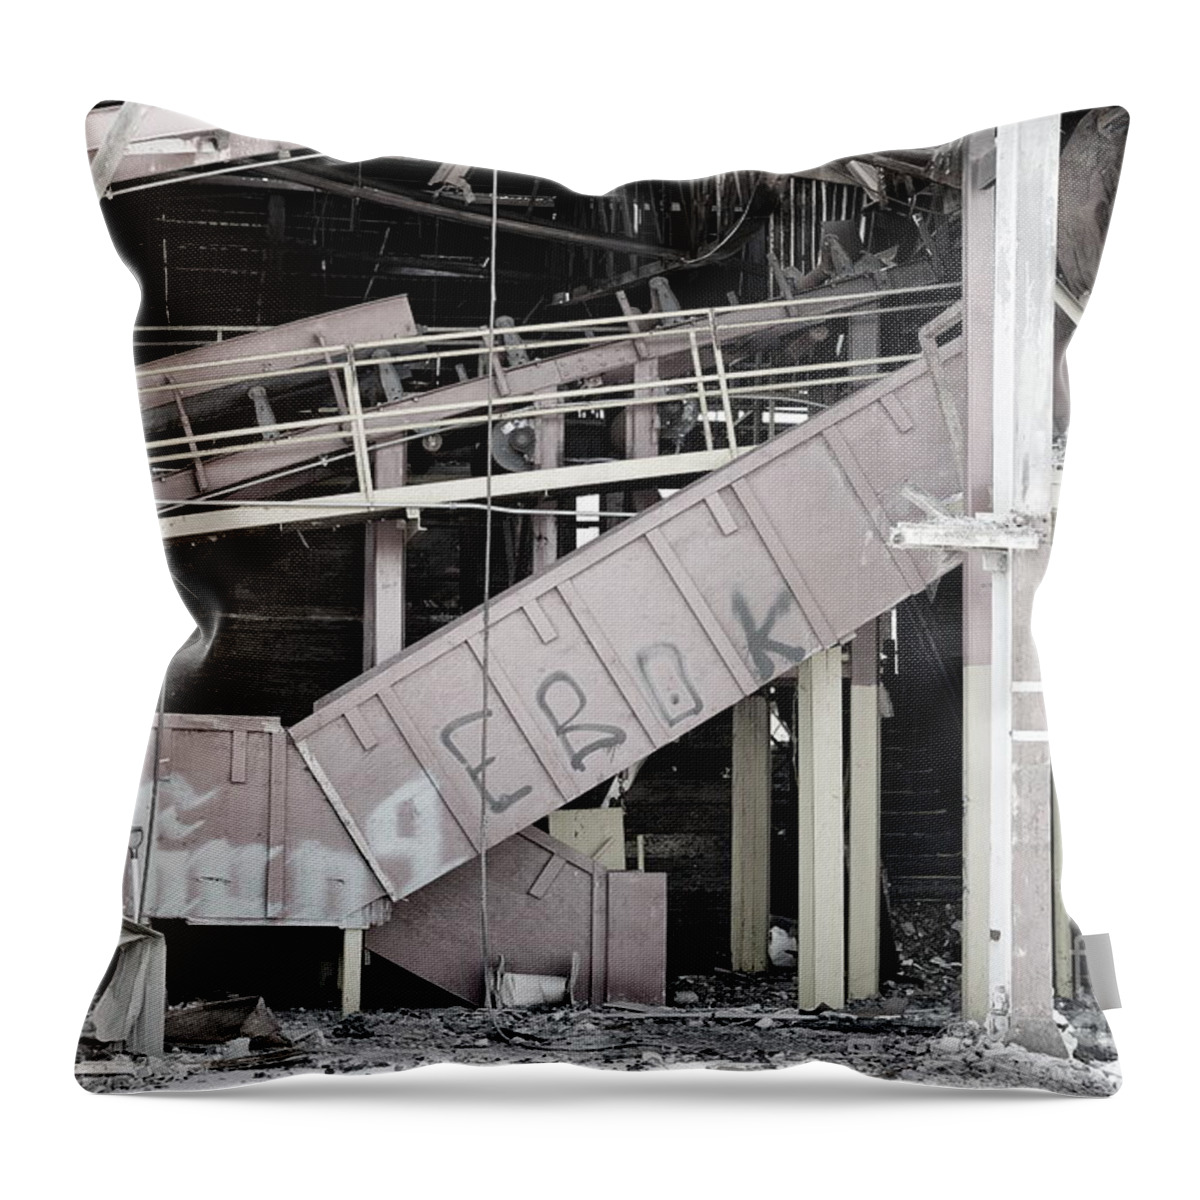 Black White Monochrome Abandoned Factory Abandoned Decrepit Old Burn Burned Throw Pillow featuring the photograph Abandoned Factory No 1 1887 by Ken DePue